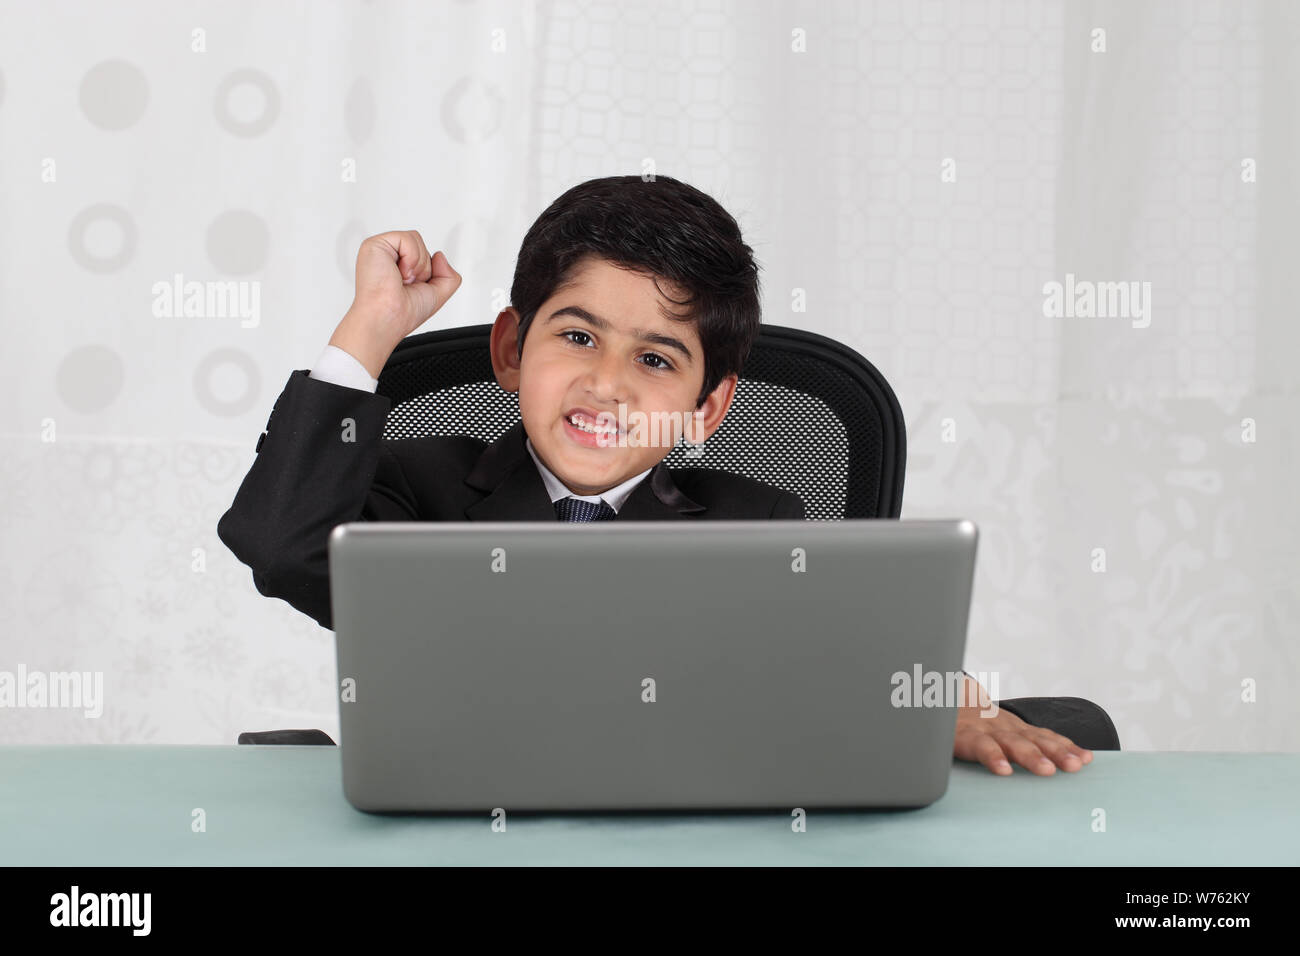 Boy pretending to be a businessman working on a laptop Stock Photo